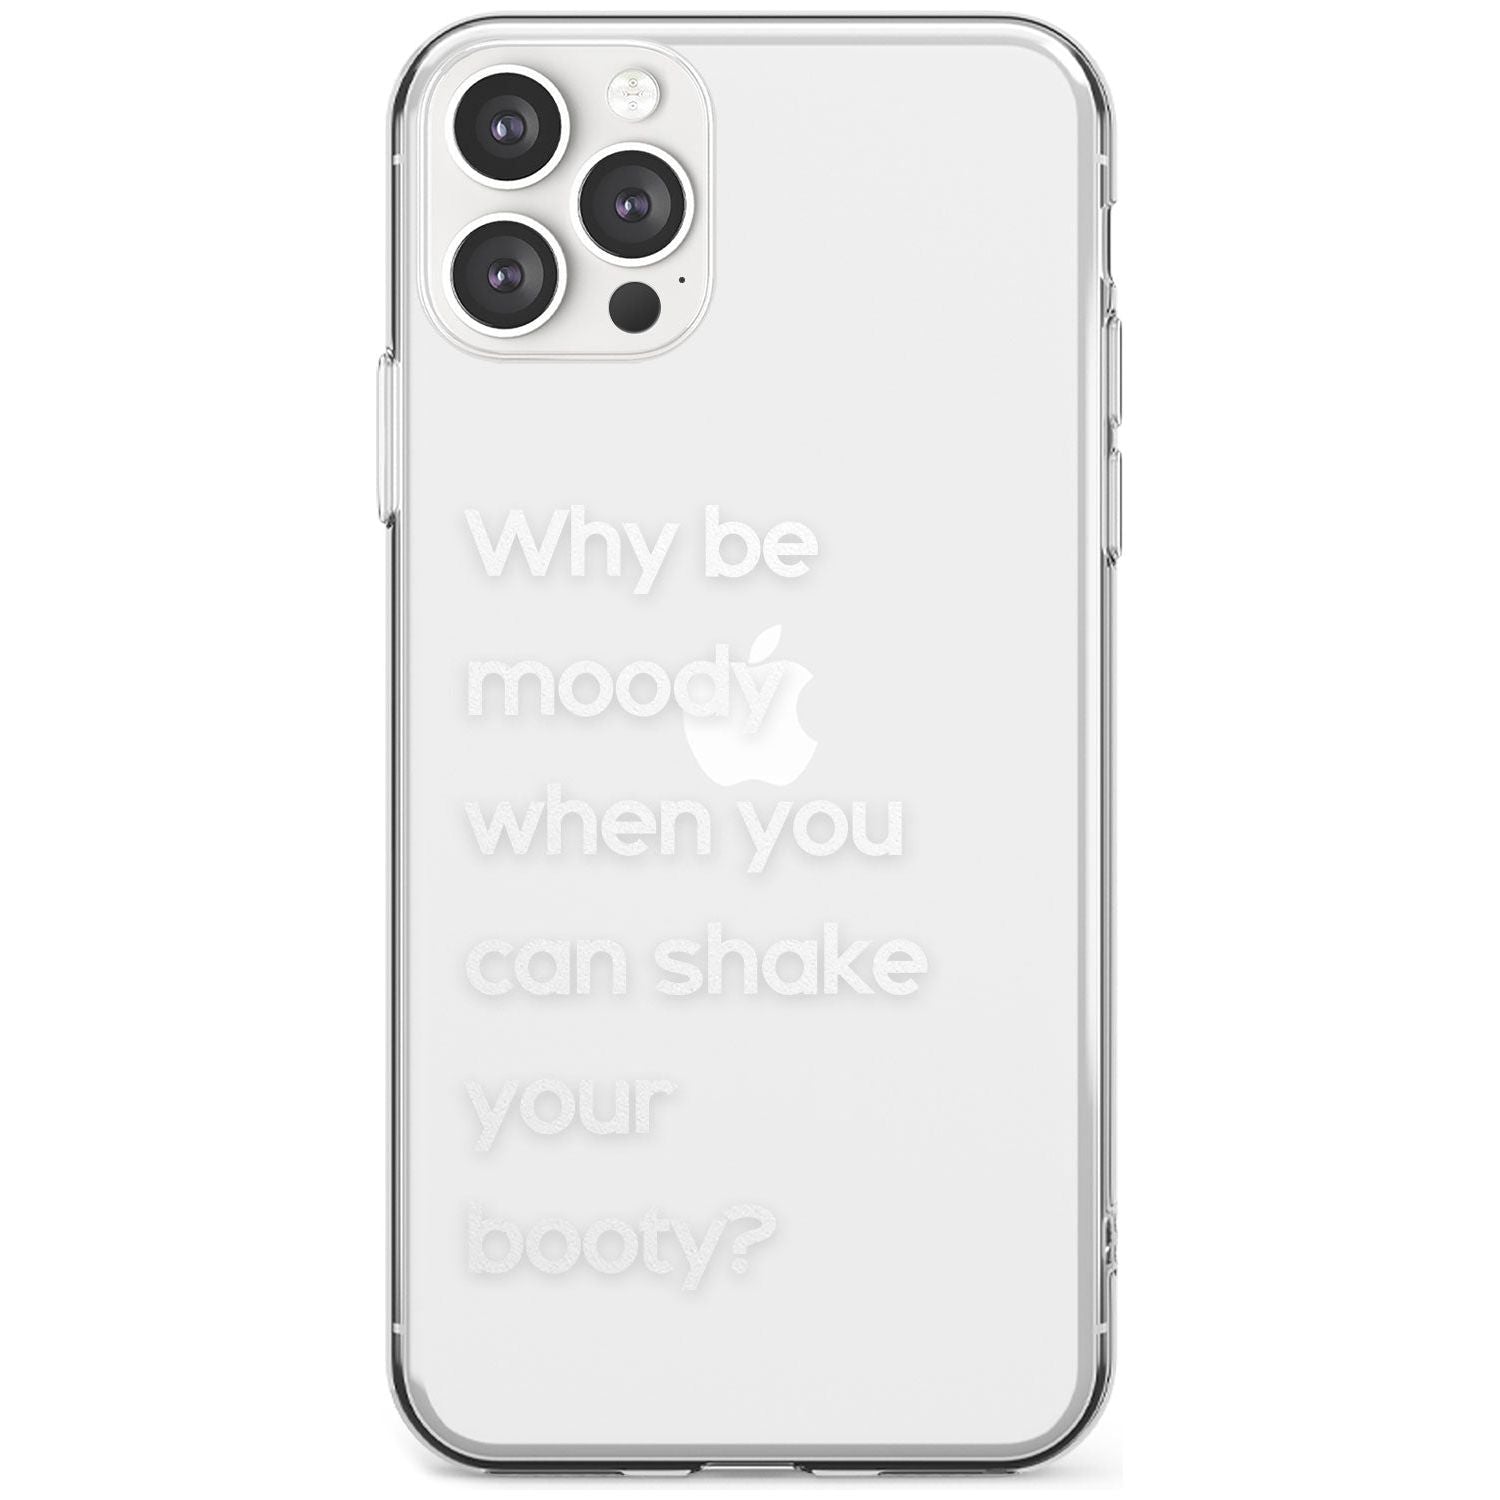 Why be moody? (White) Black Impact Phone Case for iPhone 11 Pro Max